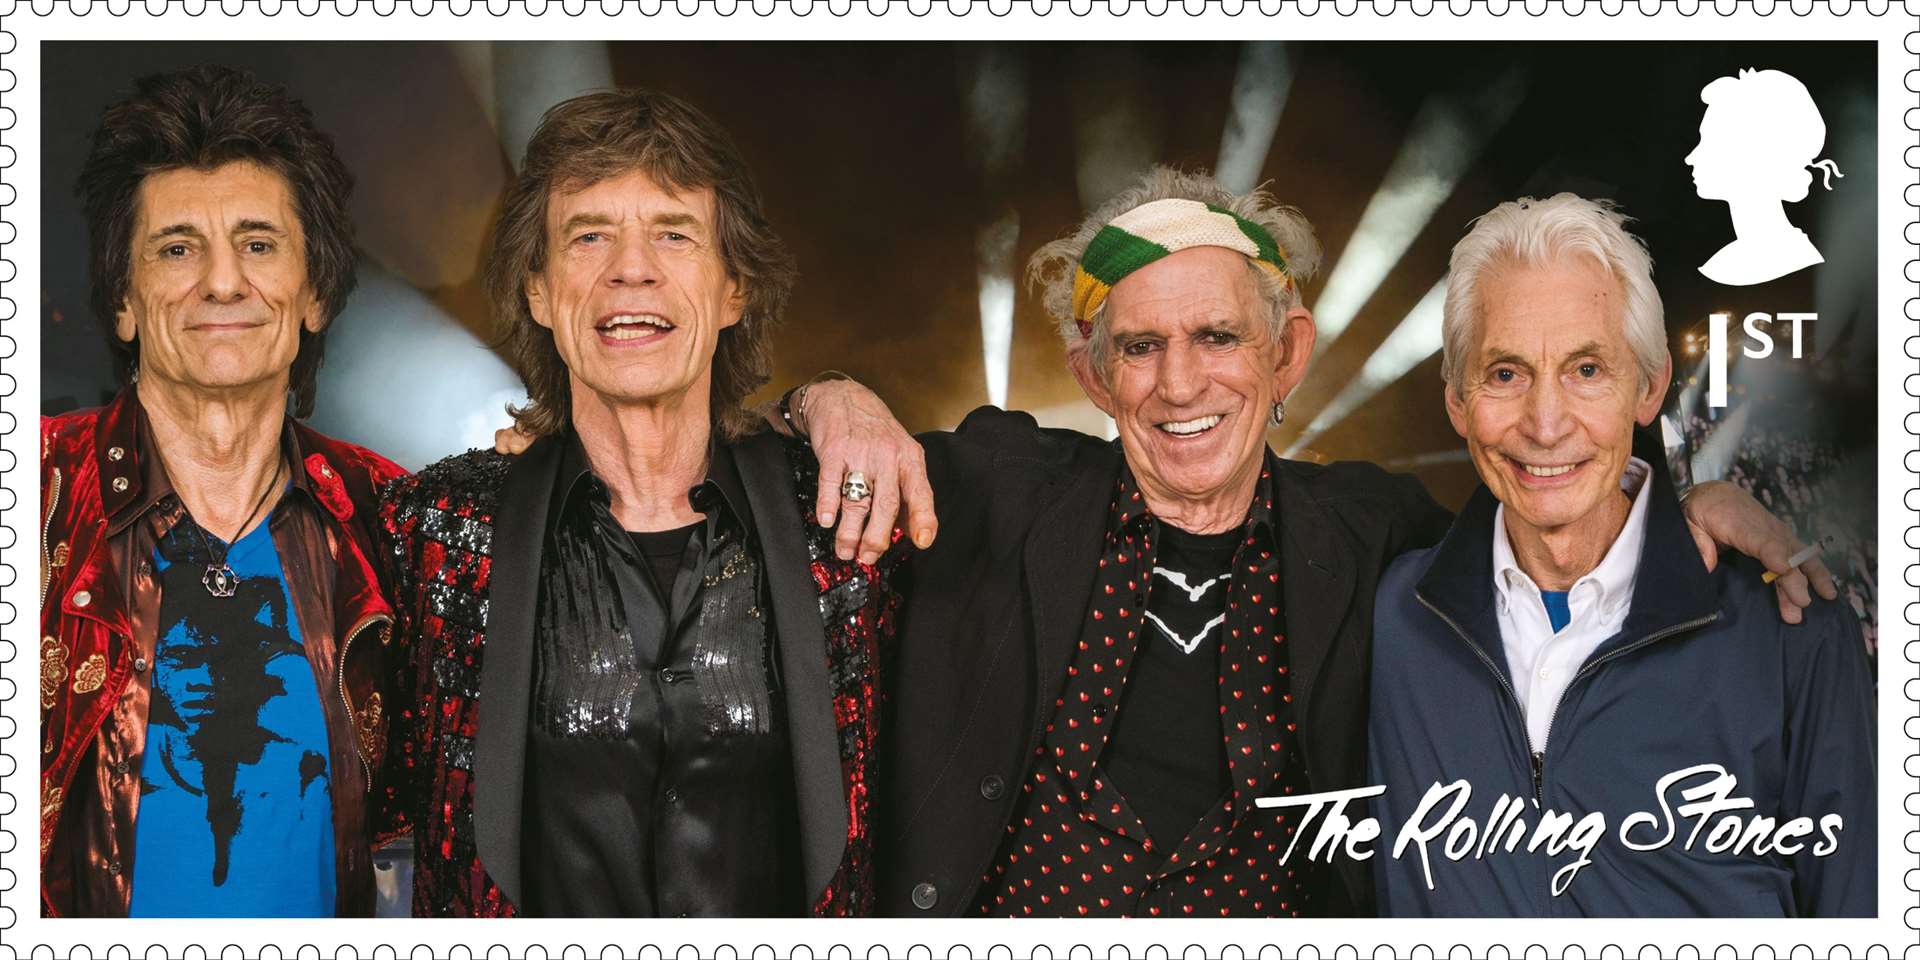 The Rolling Stones have been chosen for a new exclusive set of stamps